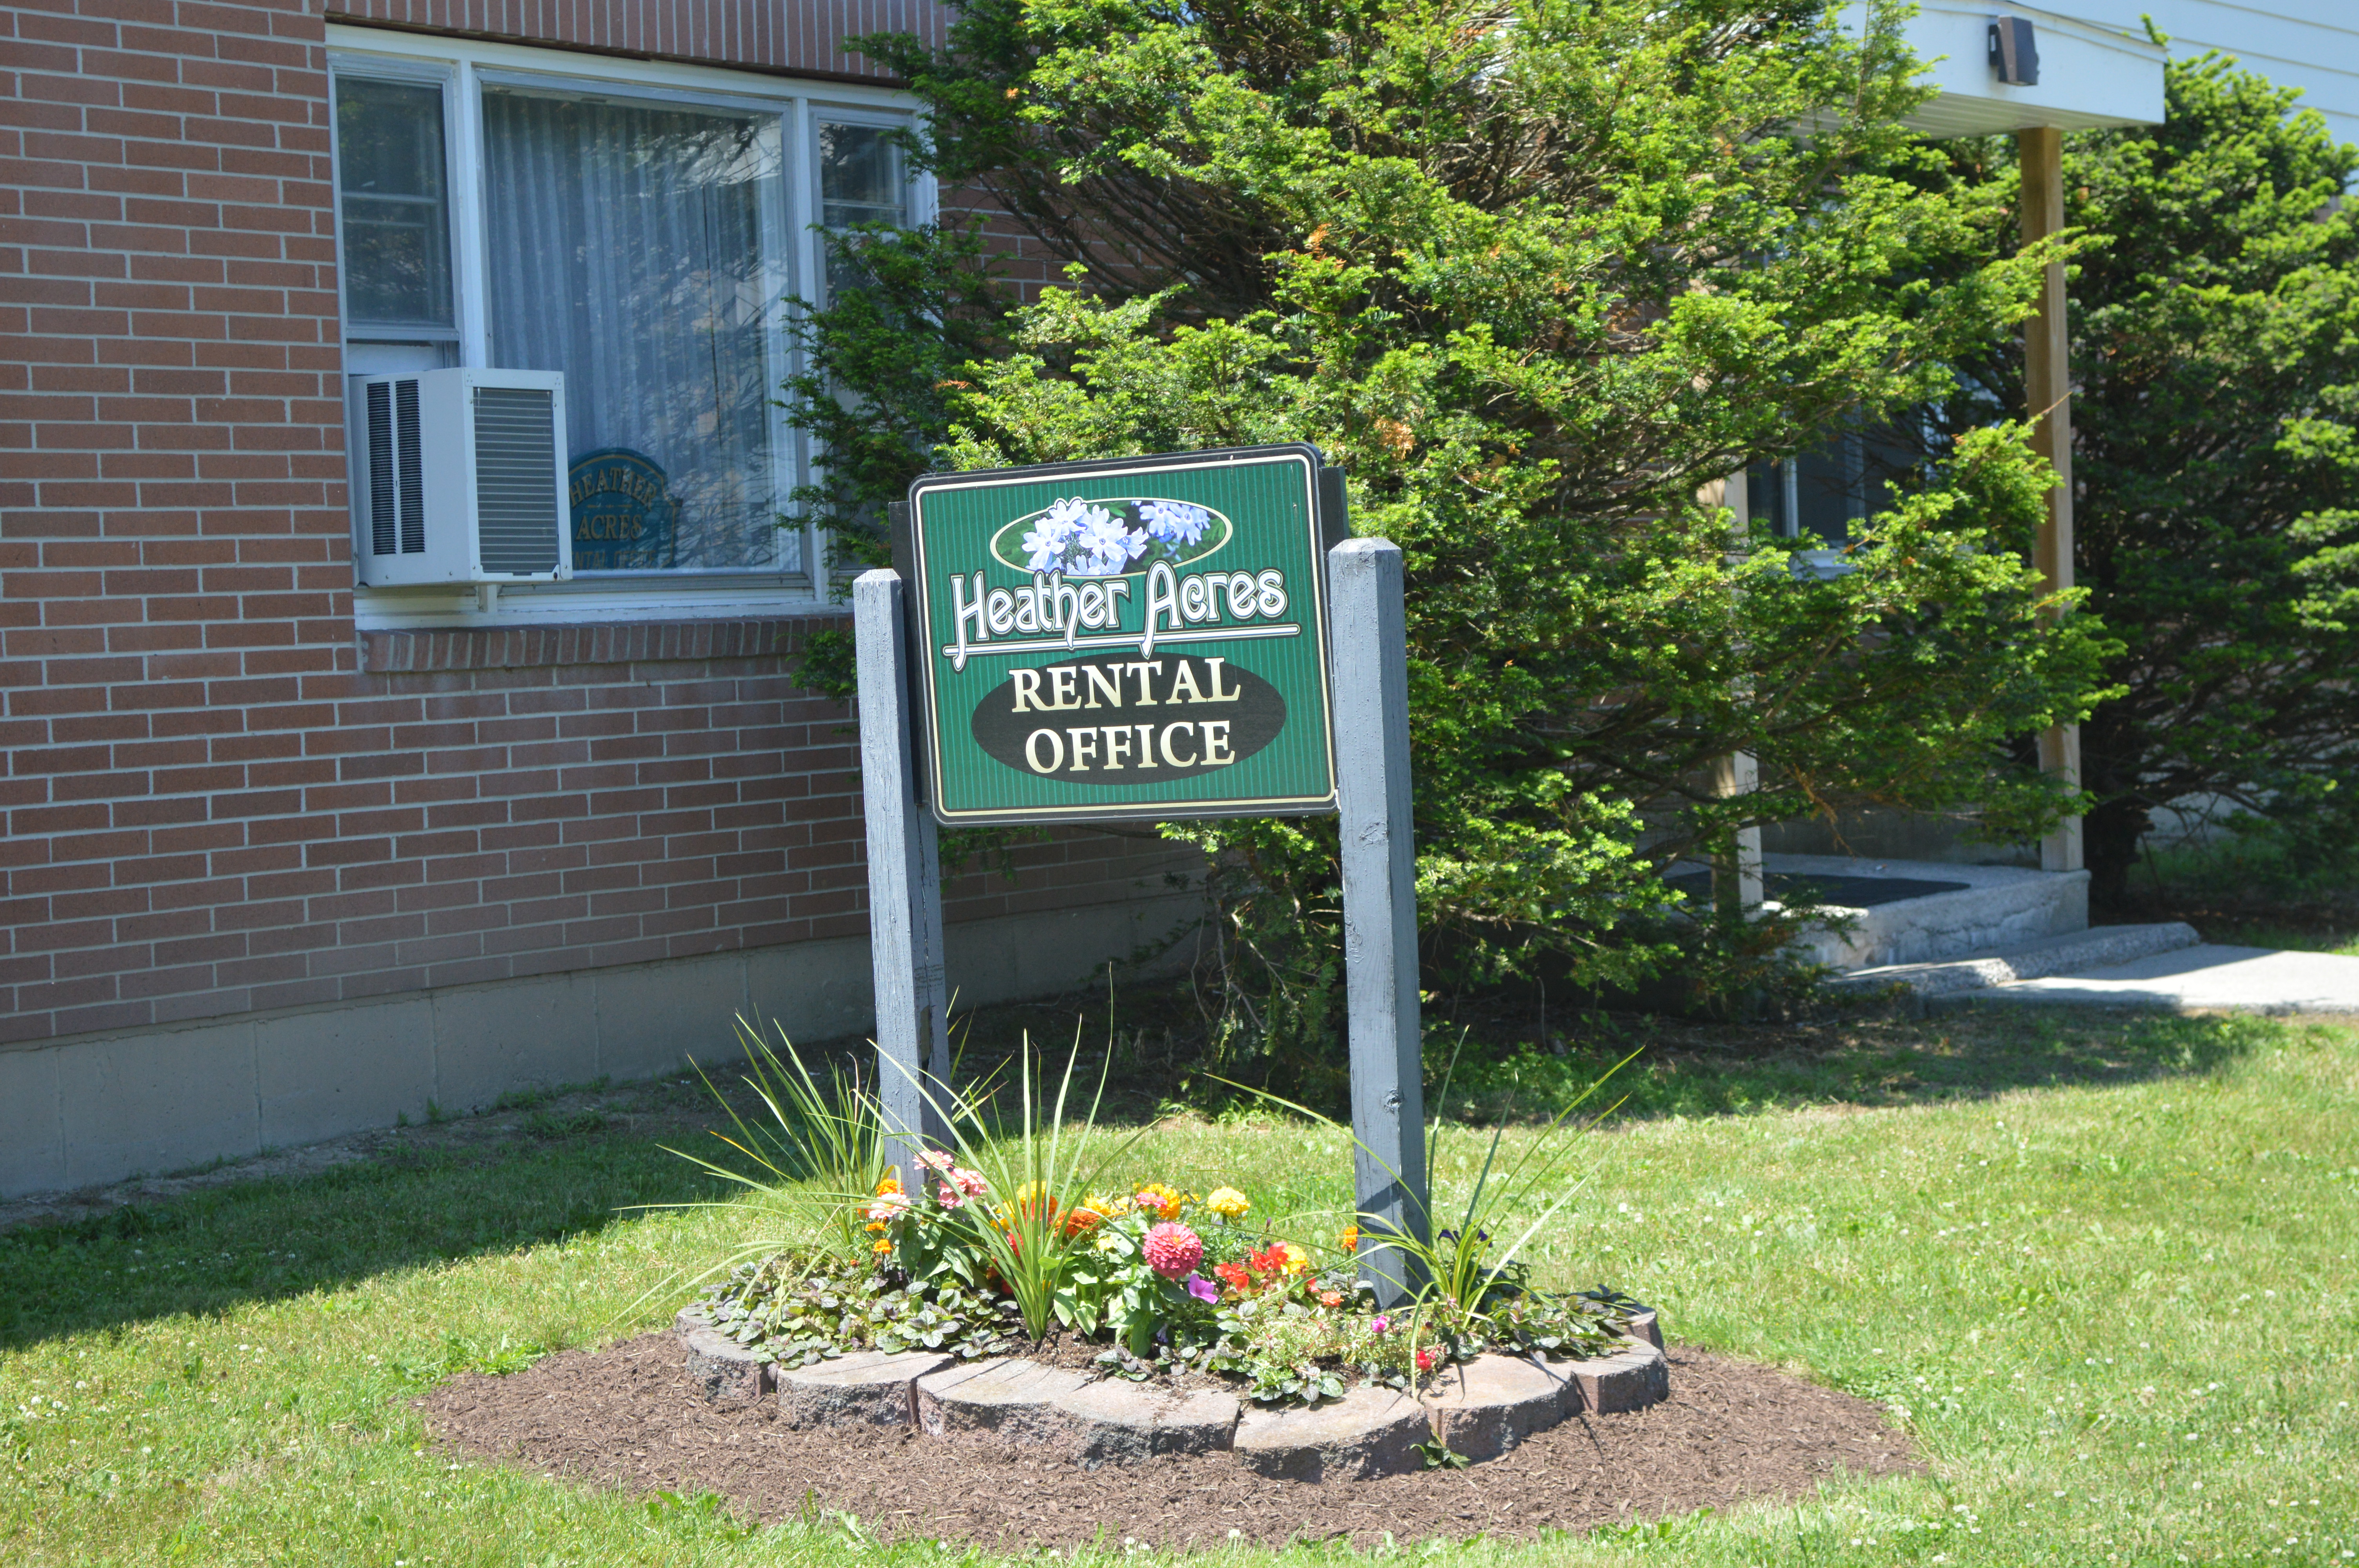 Rental Office Sign-flowers